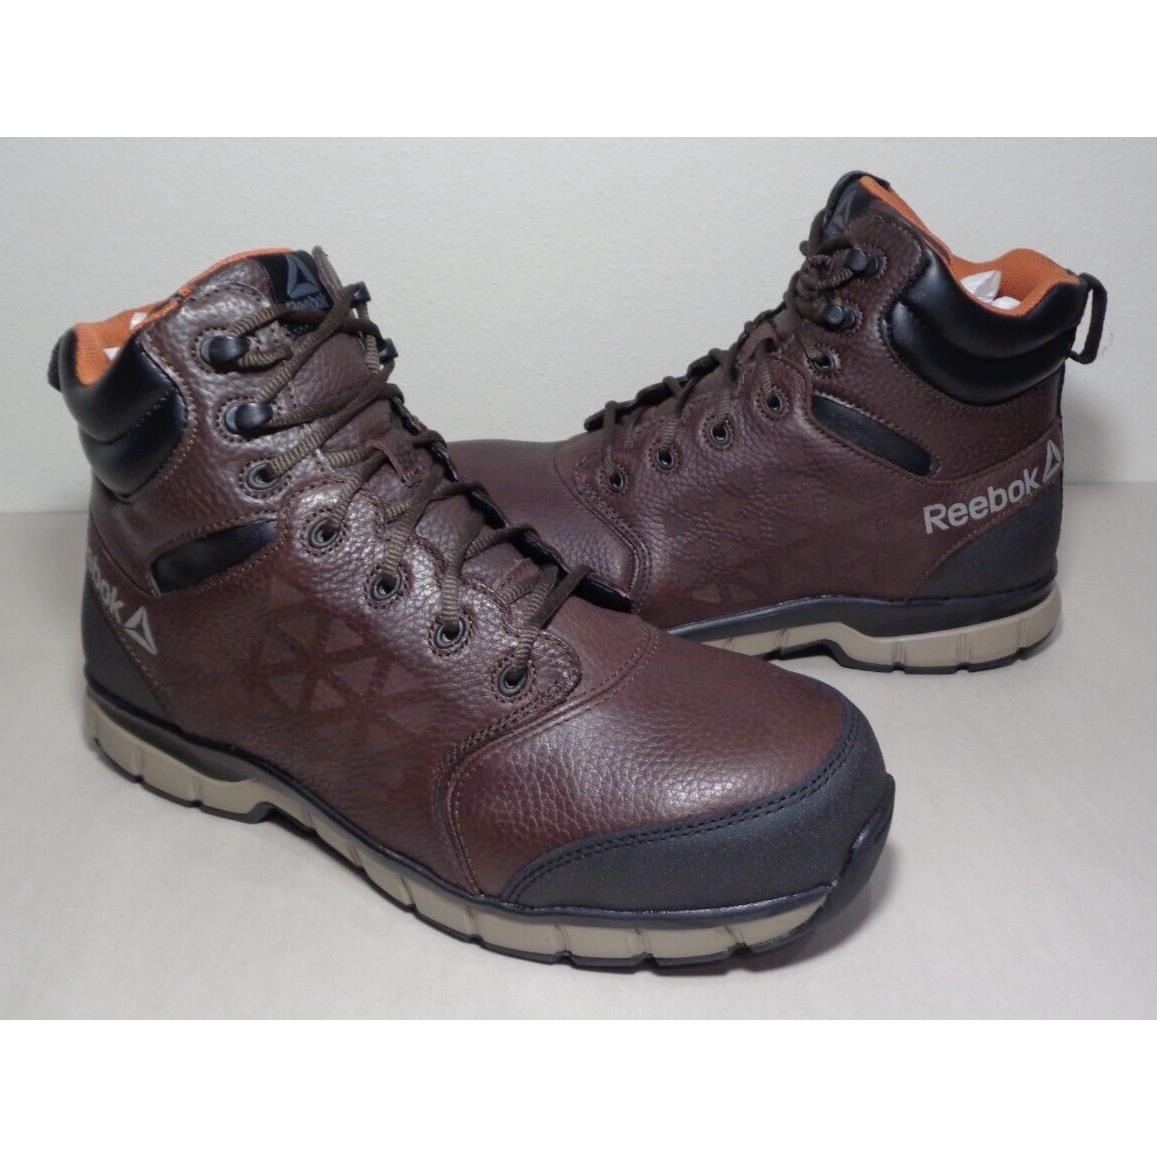 Reebok Size 11.5 M Sublite Cushion Brown Boots Men`s Safety Toe Work Shoes